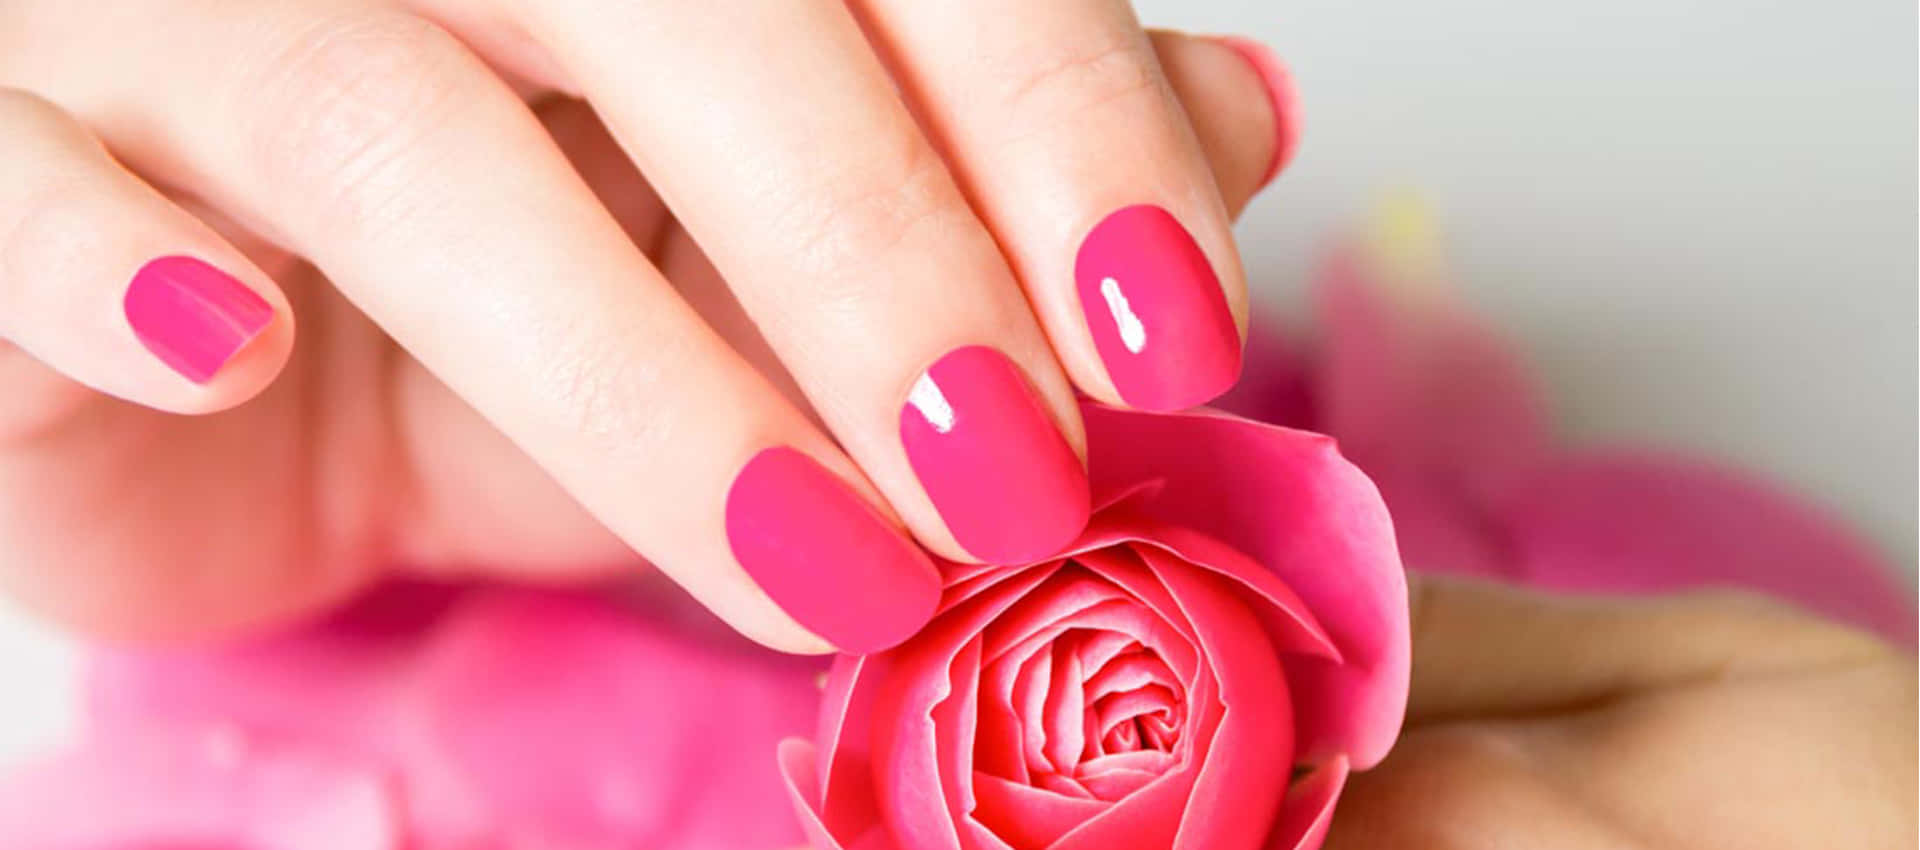 Elegant Pink Nails on a Woman's Hand Wallpaper